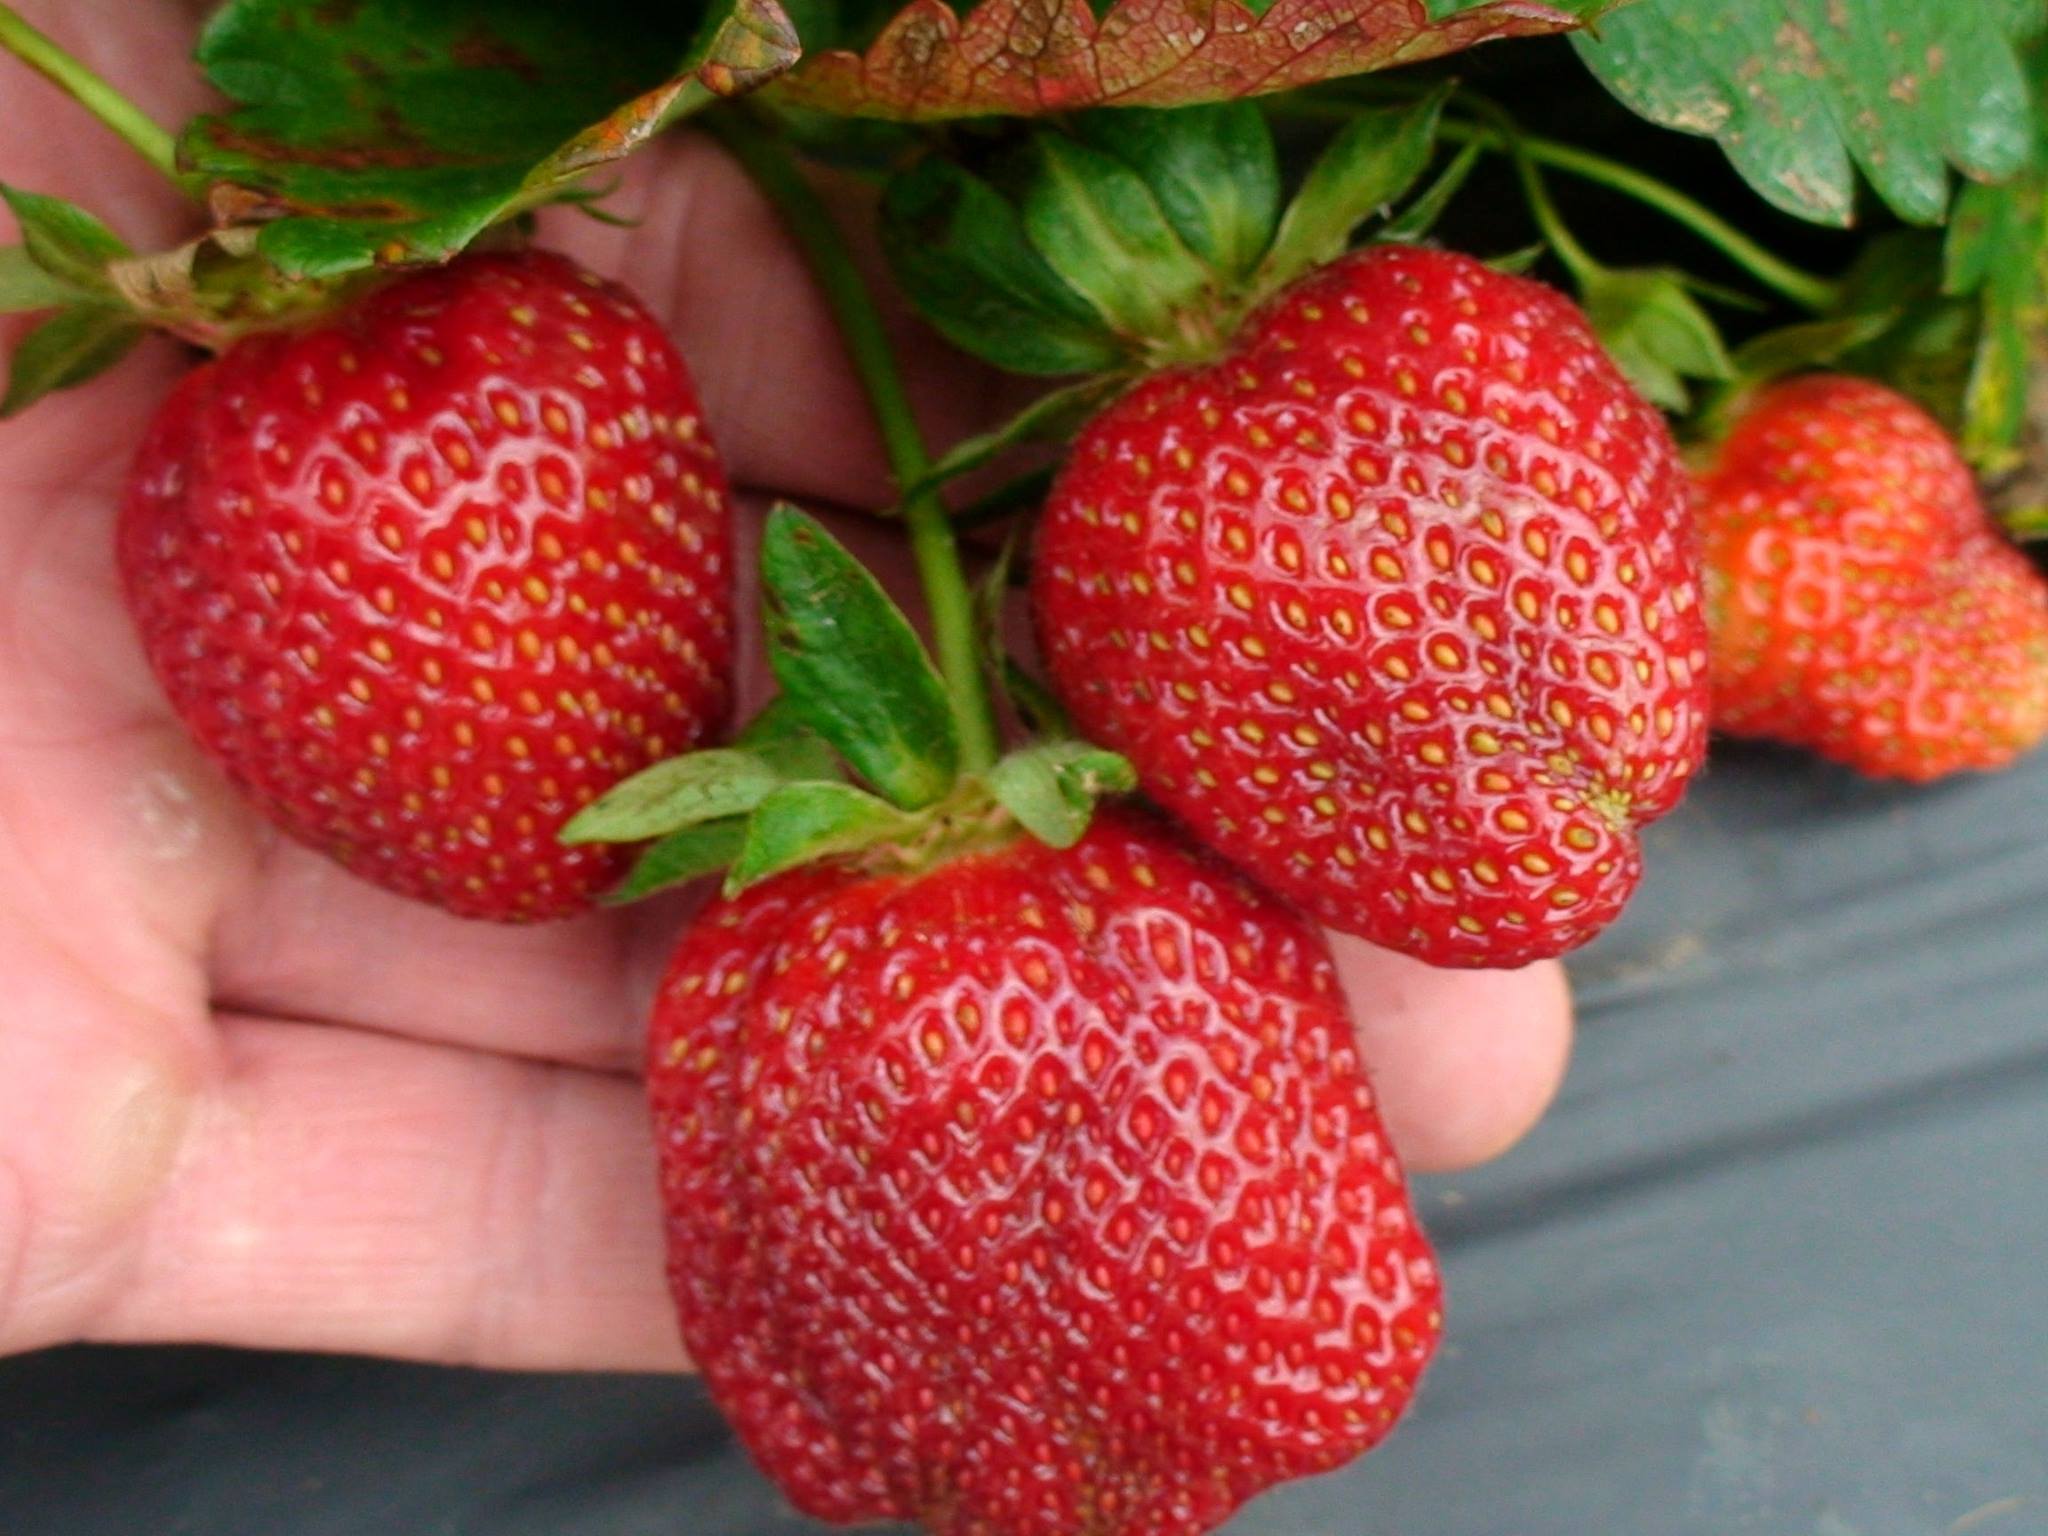 holmestead farm strawberry 15 April events you won’t want to miss in Birmingham